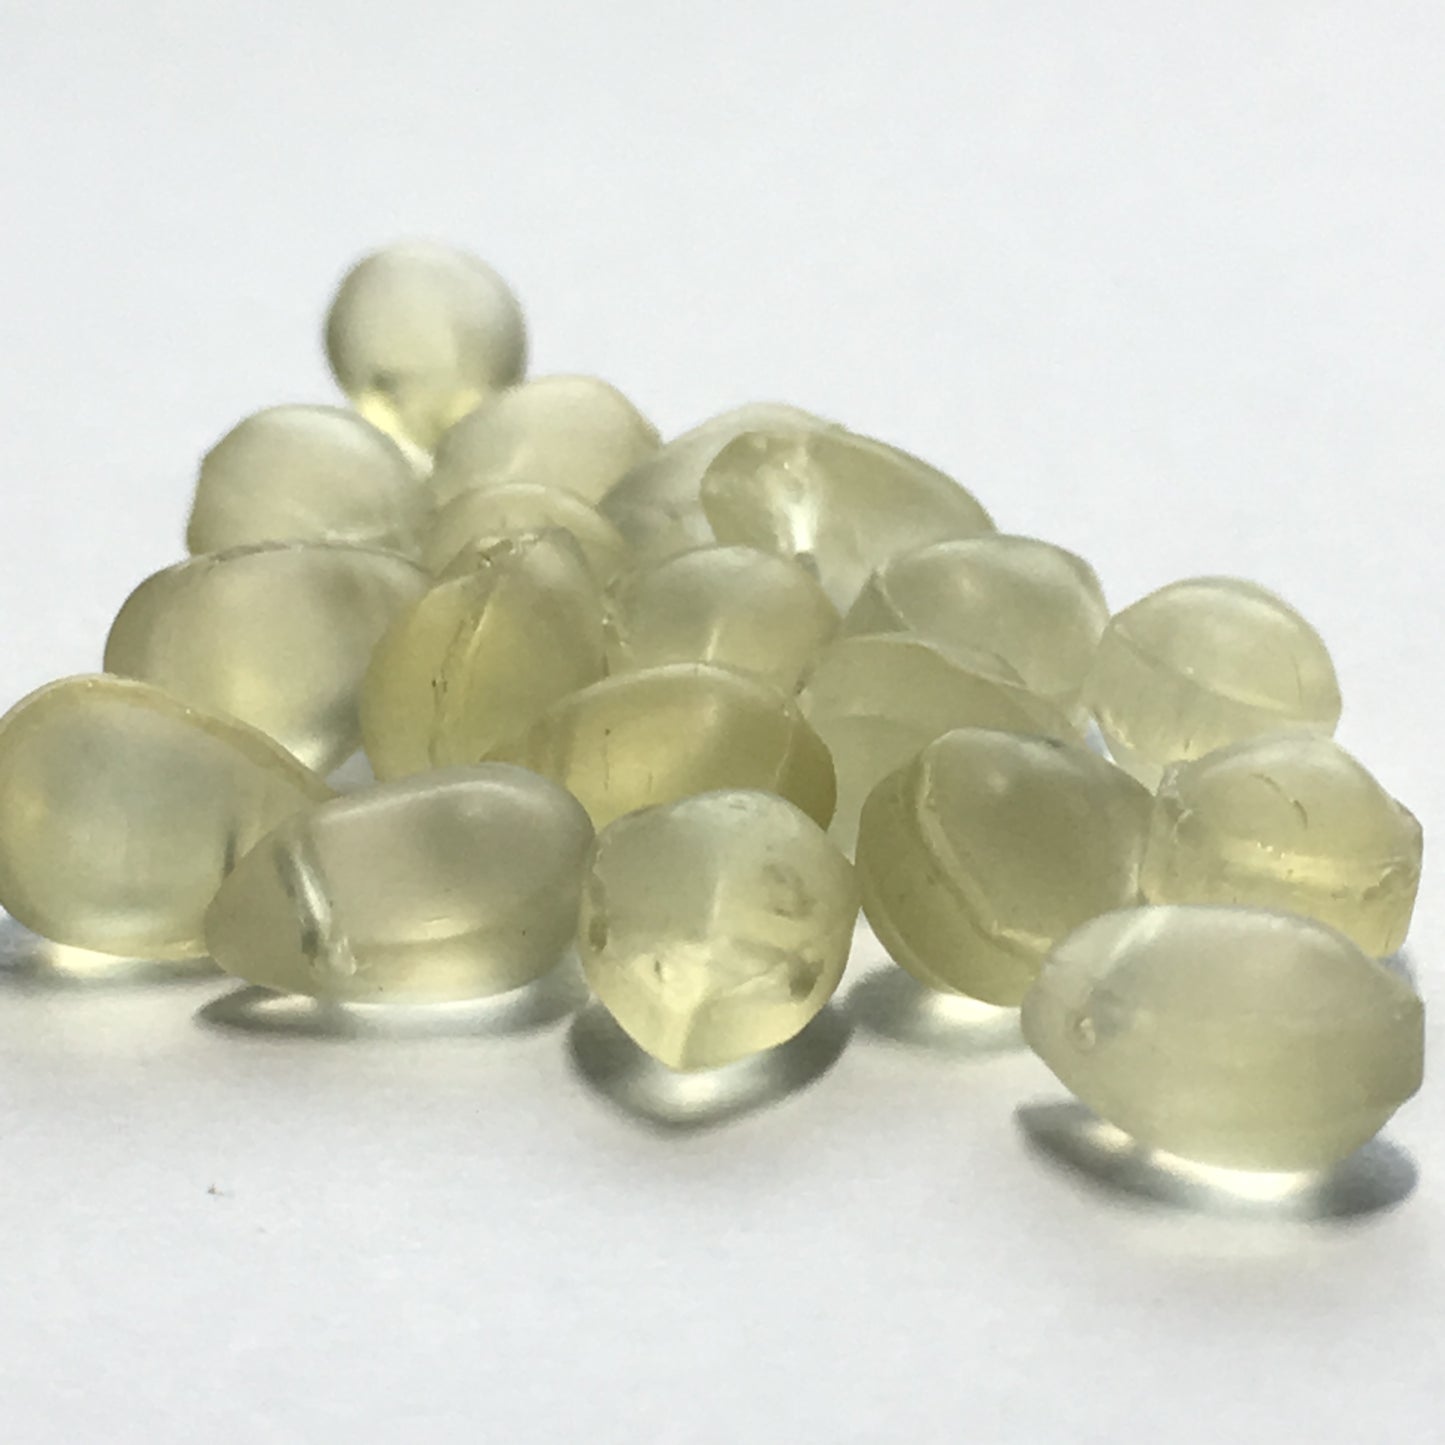 Pale Yellow Frosted Glass Teardrop Beads, 9 x 6 mm, 20 Beads